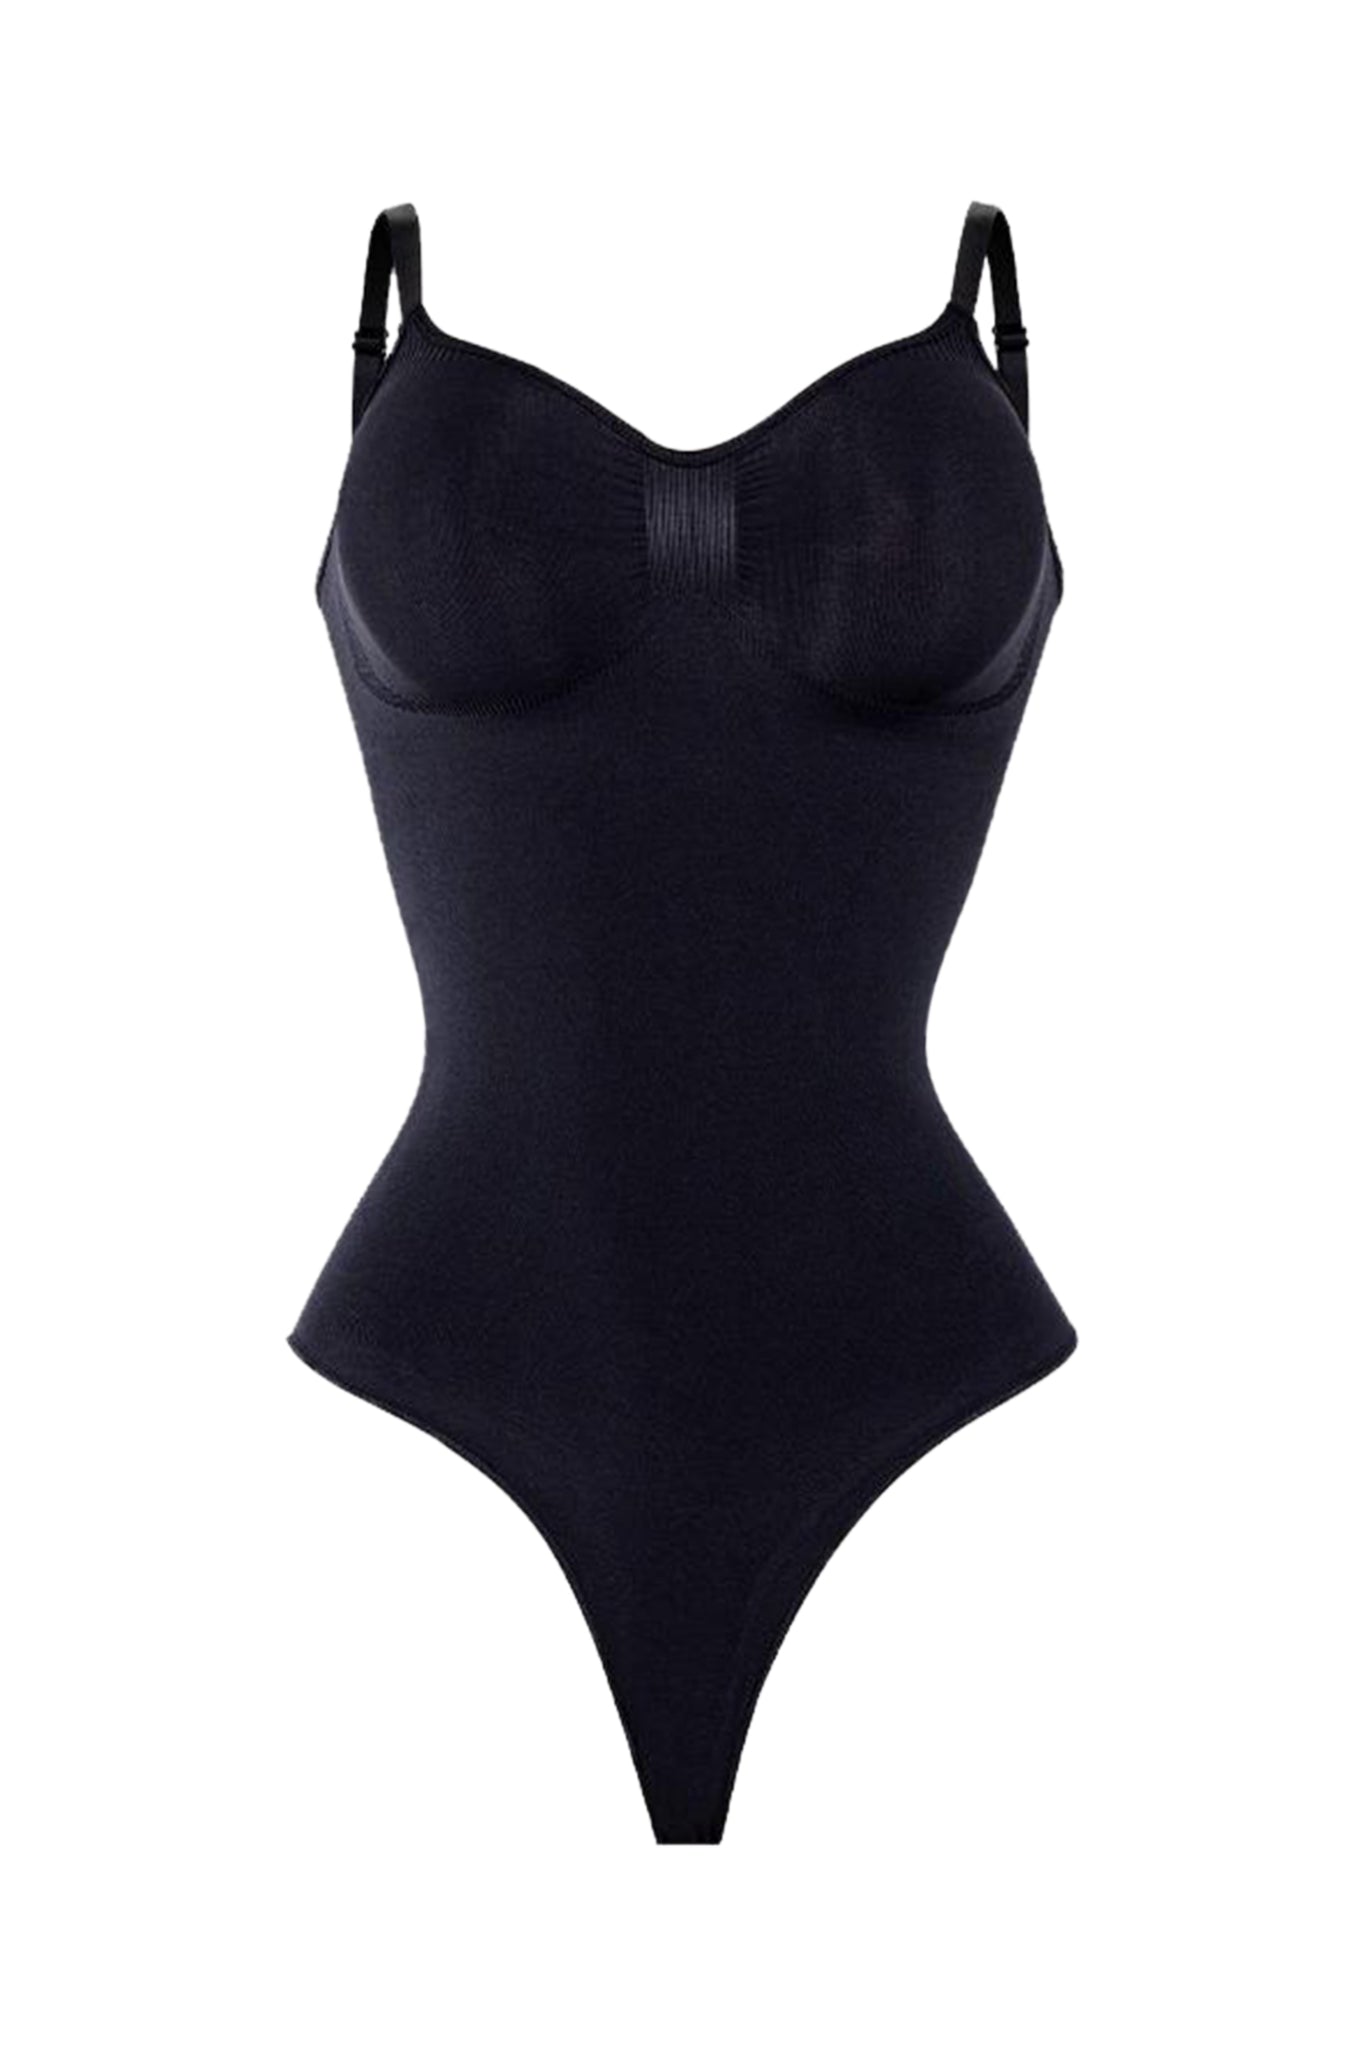 Stretchy and Sculpting Firm Shape Thong Bodysuit - Black - Ladies